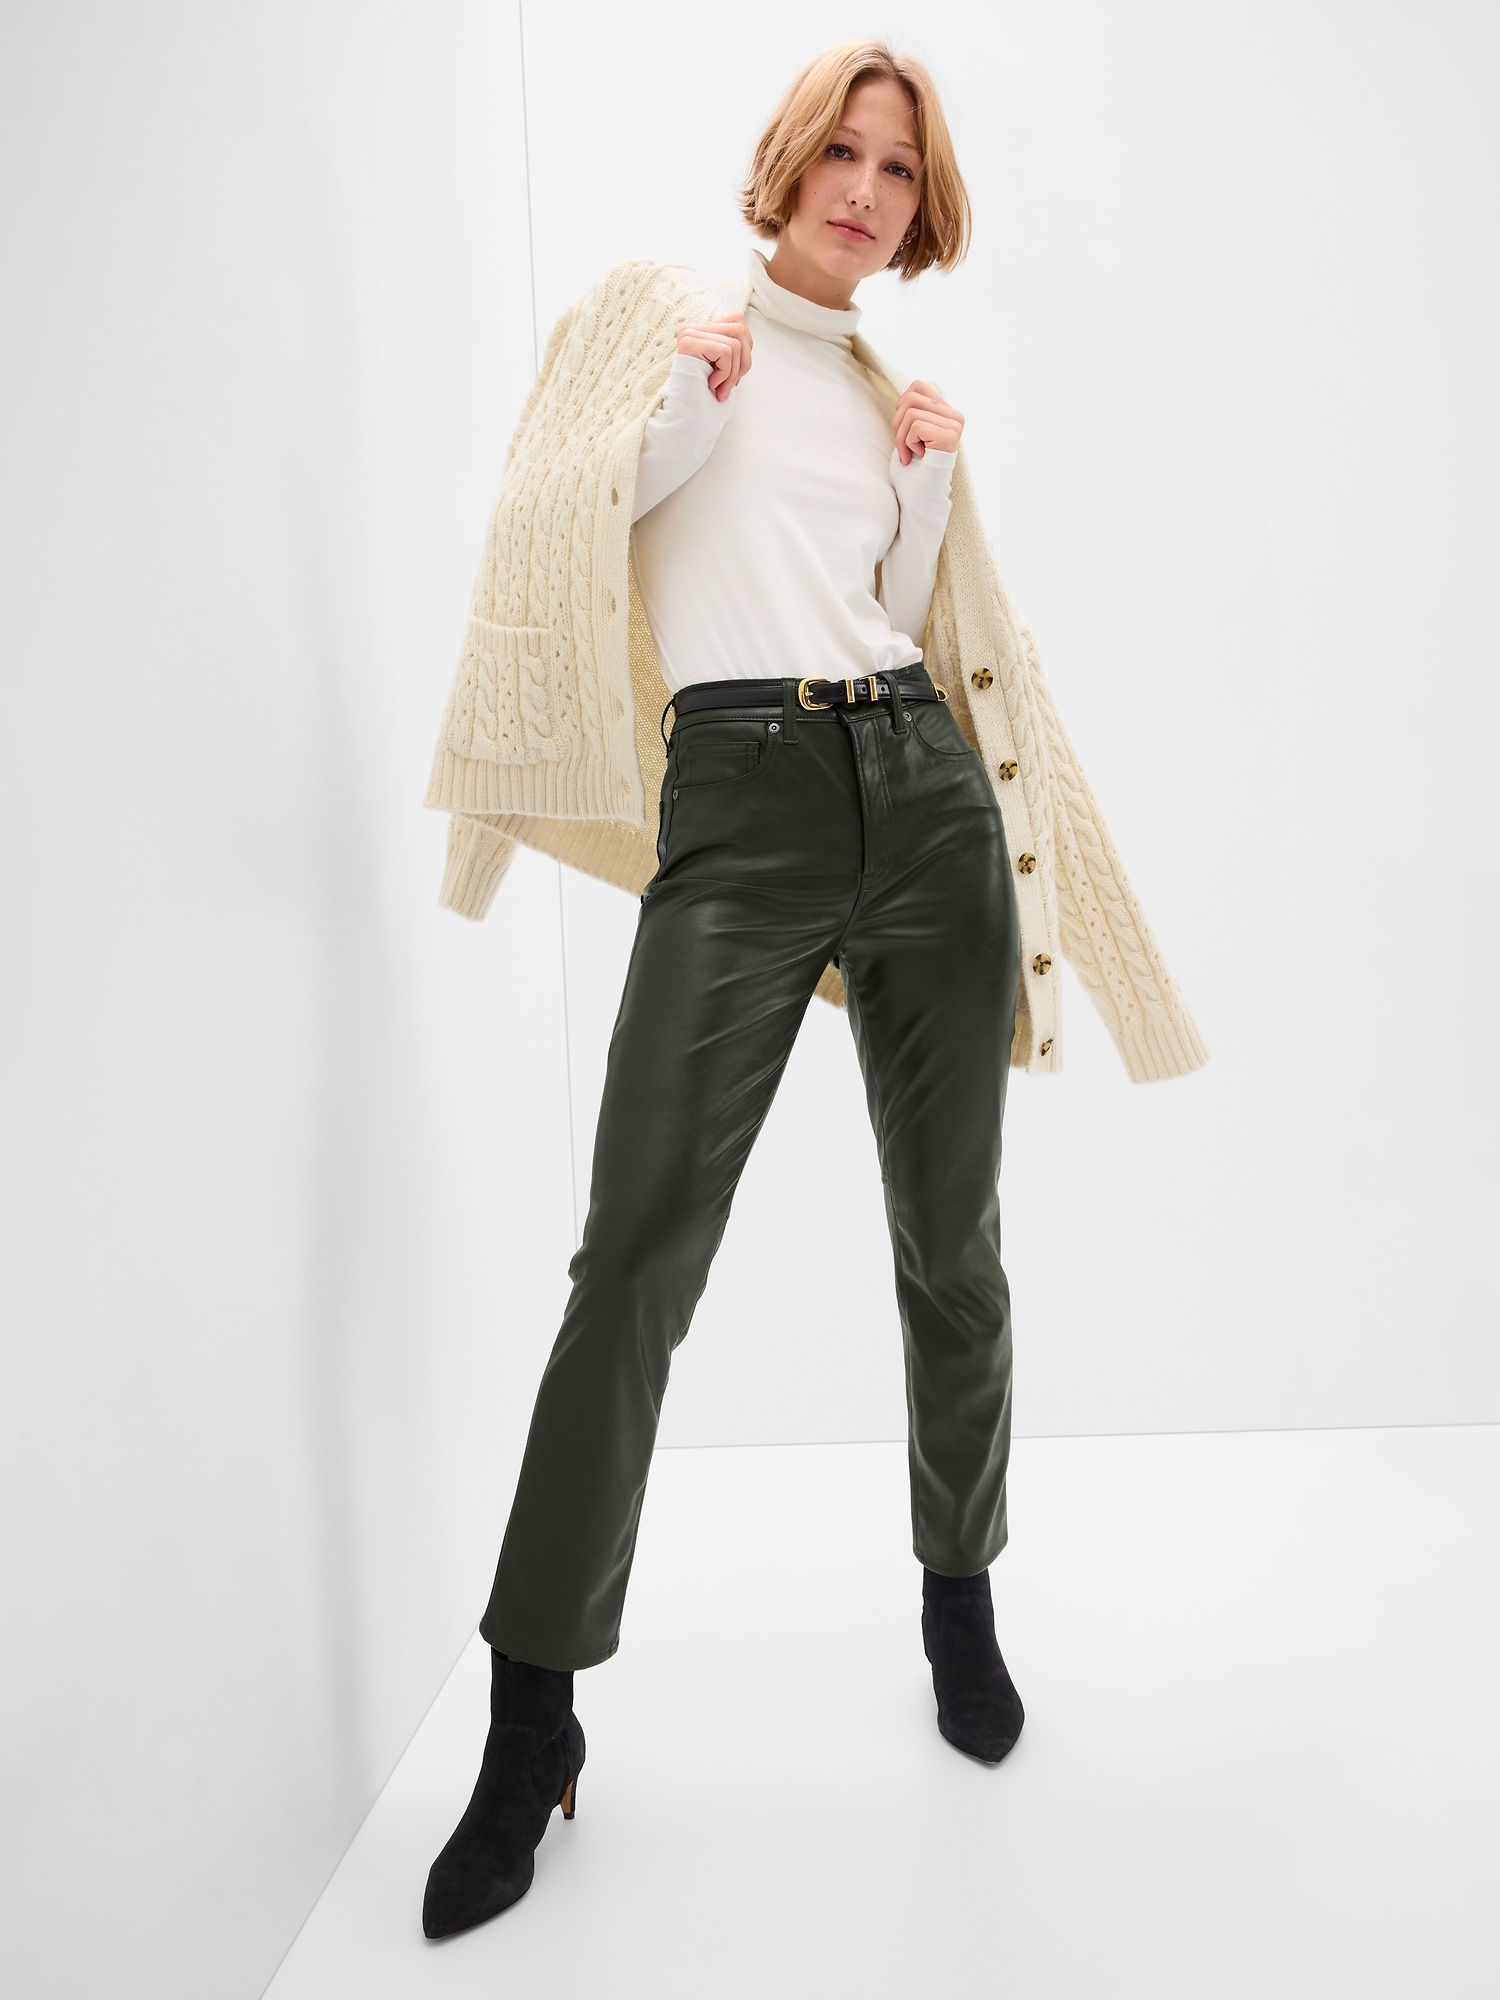 6 Ways // How to Wear Olive Green Faux Leather Pants - This is our